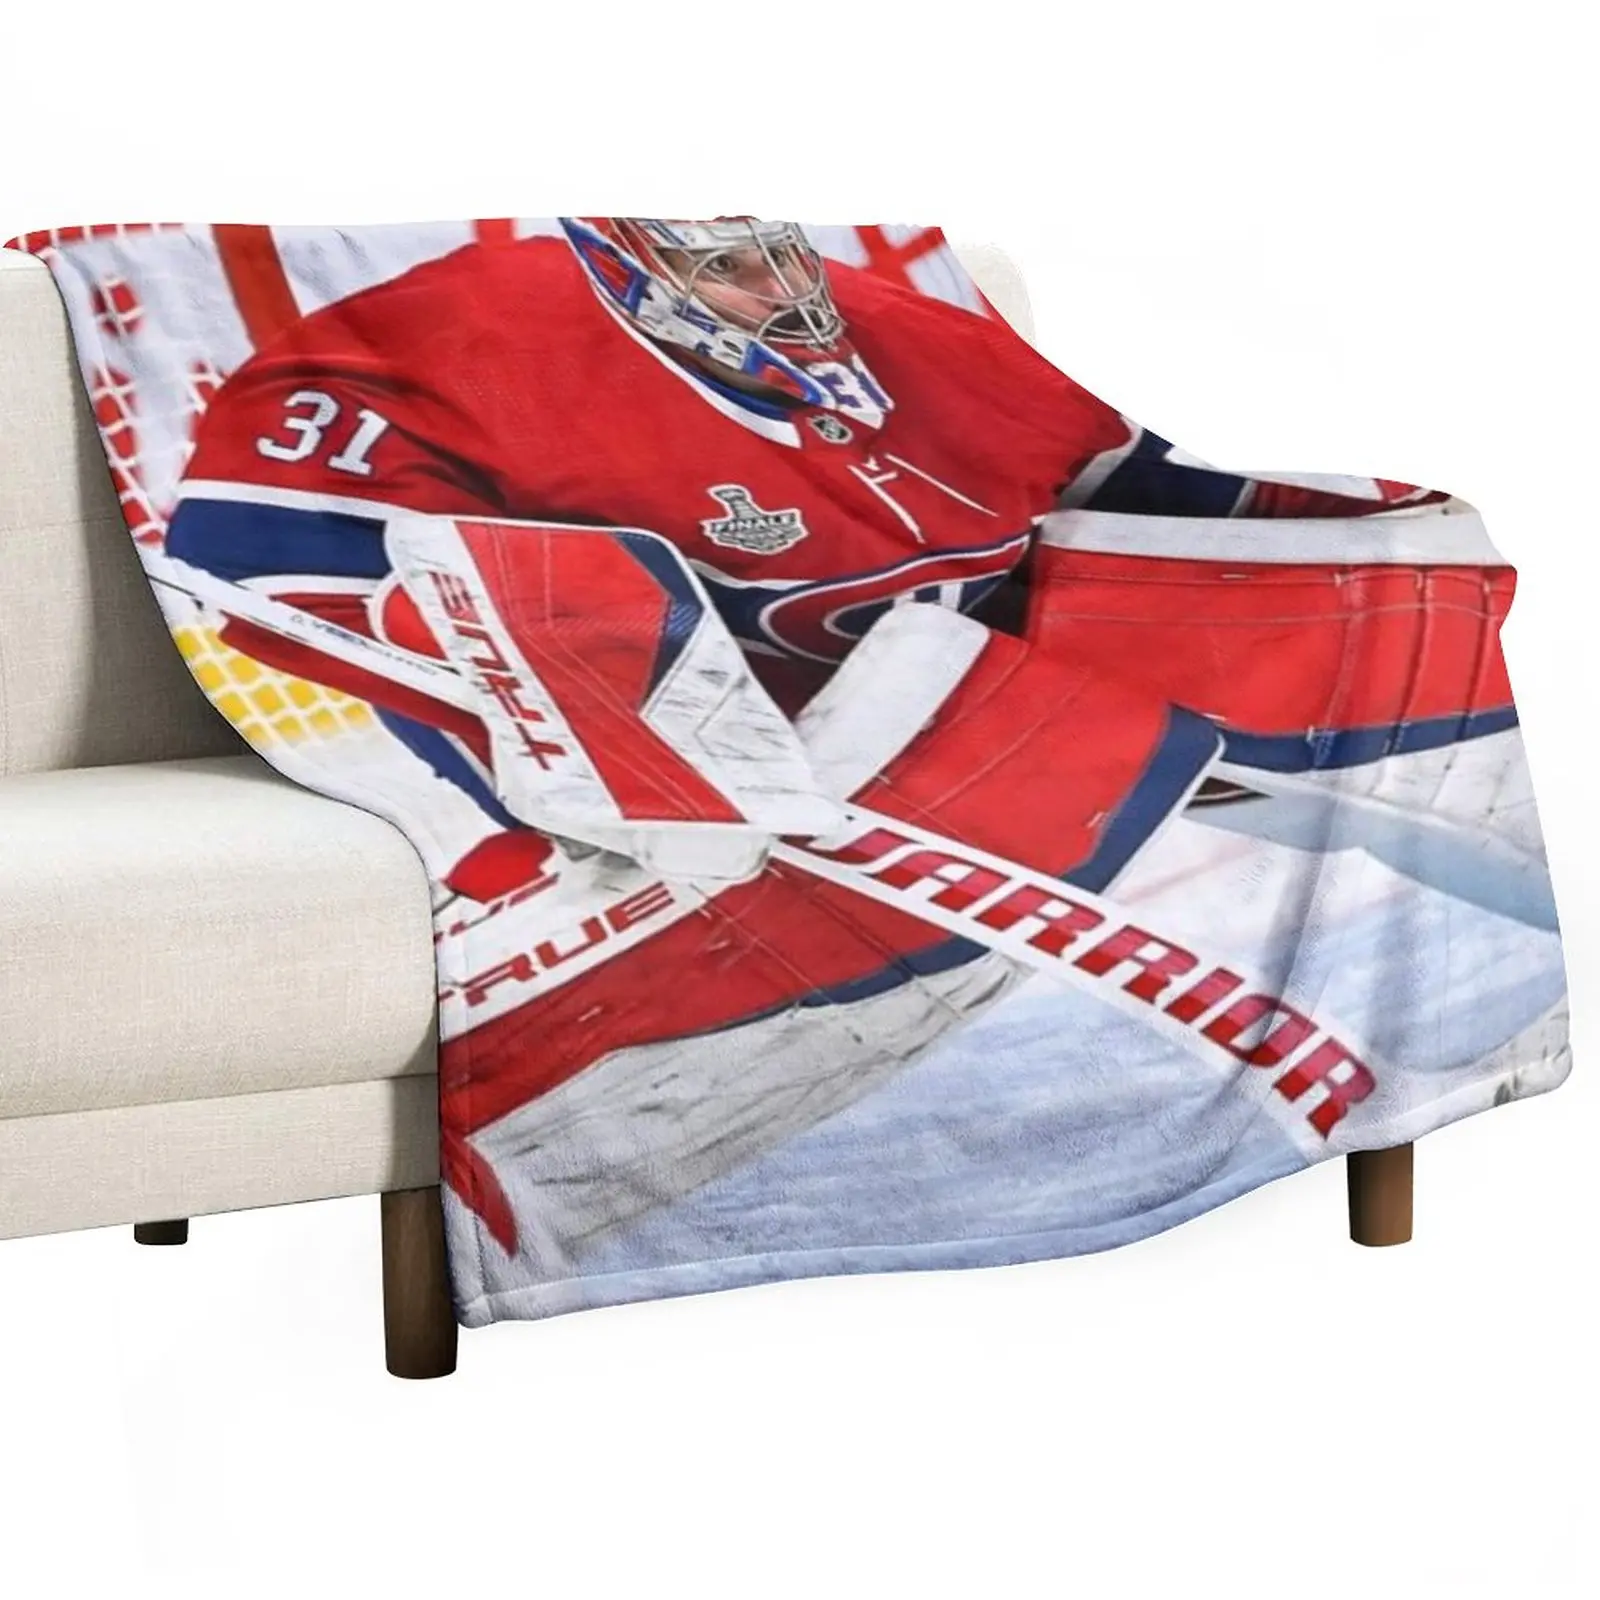 

Carey Price Throw Blanket Giant Sofa Blanket blankets and blankets